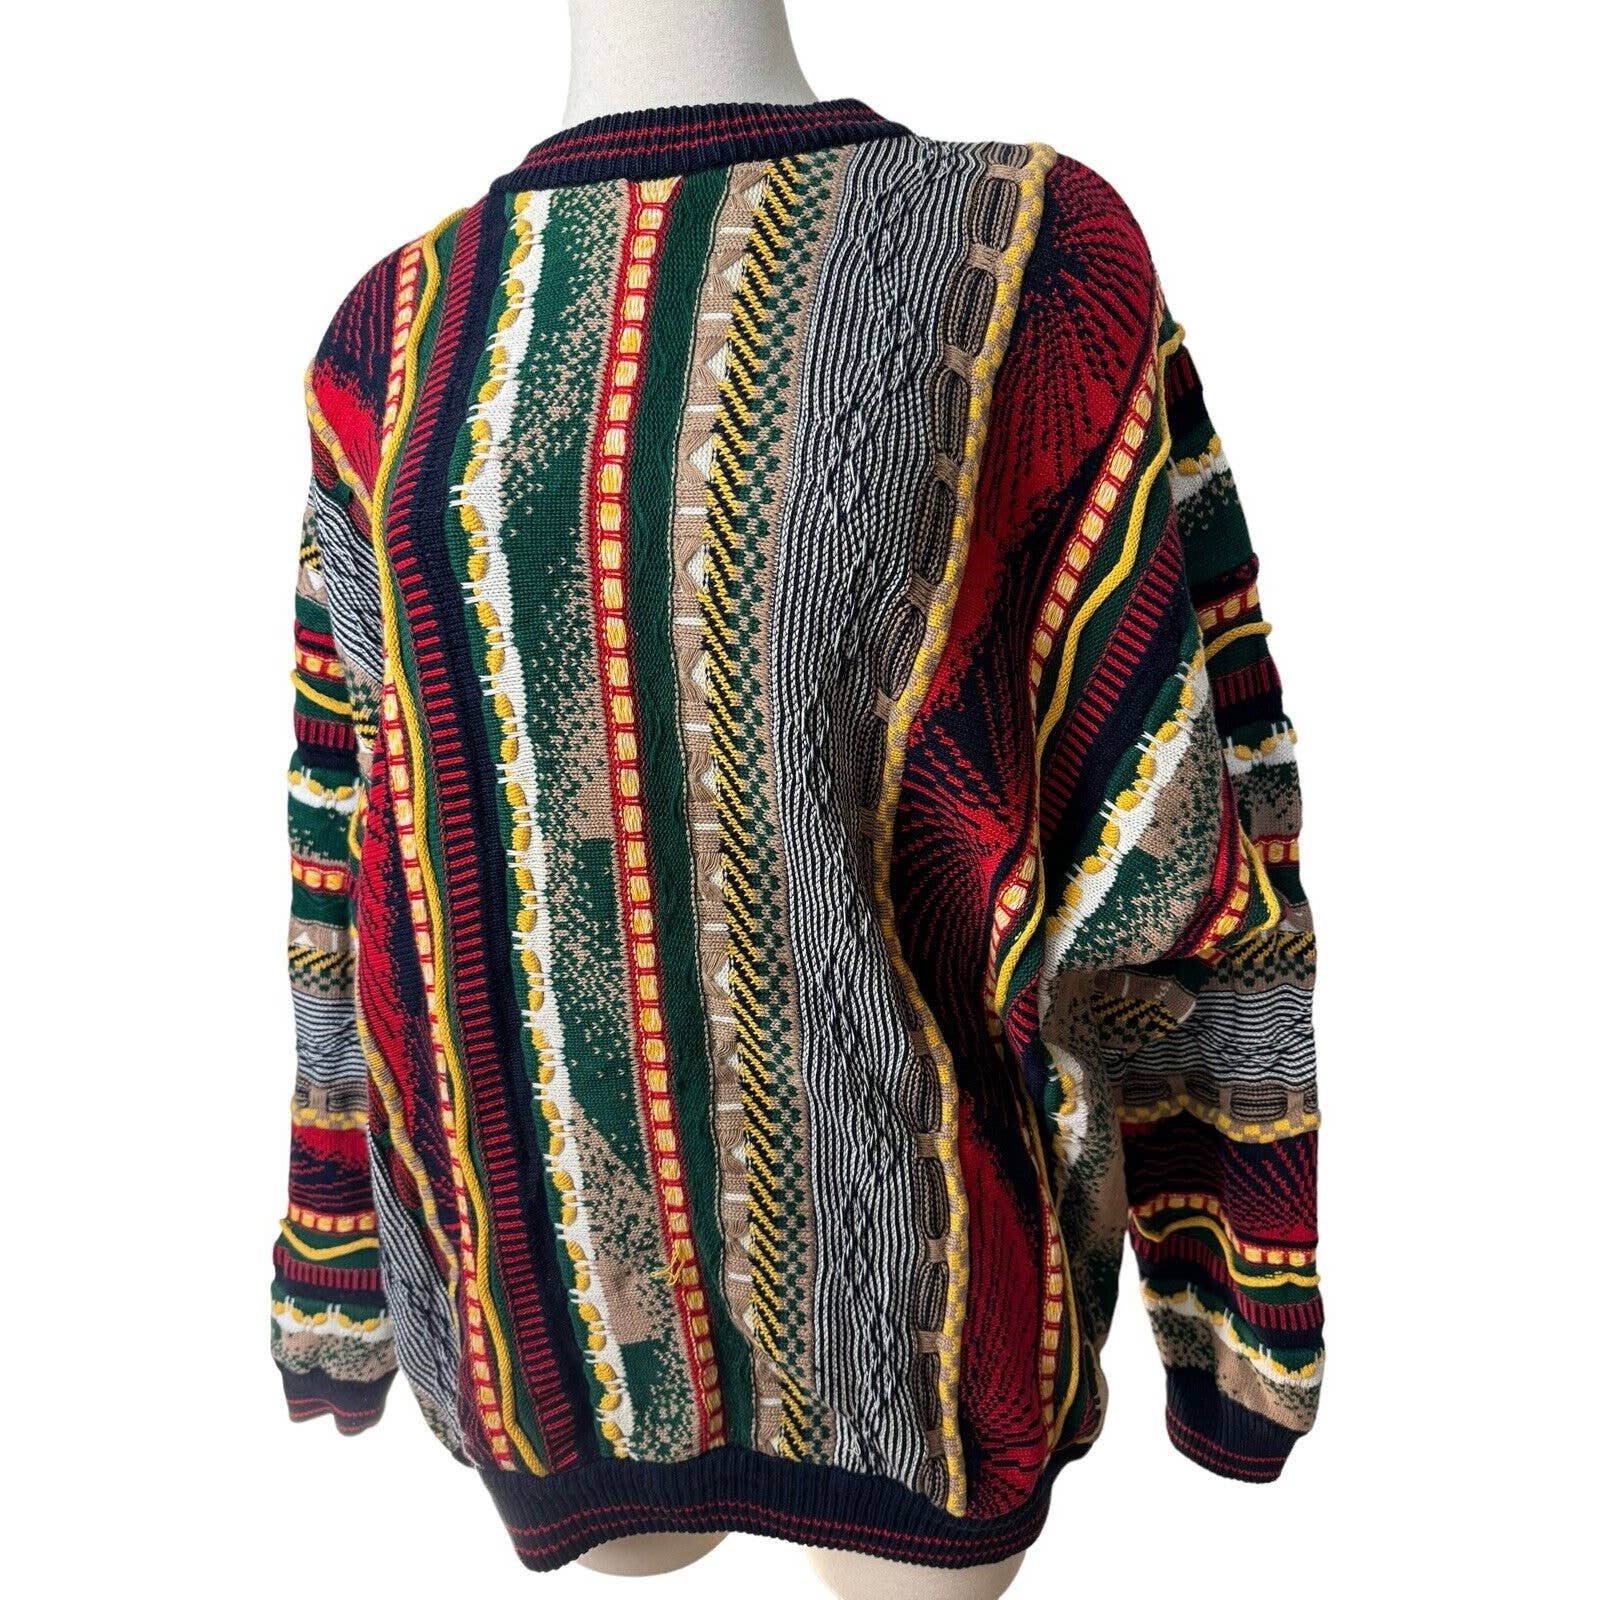 CoogiCoogi Mens Sweater -Missing Tag- Cotton Colorful - XL/XXL - Black Dog Vintage